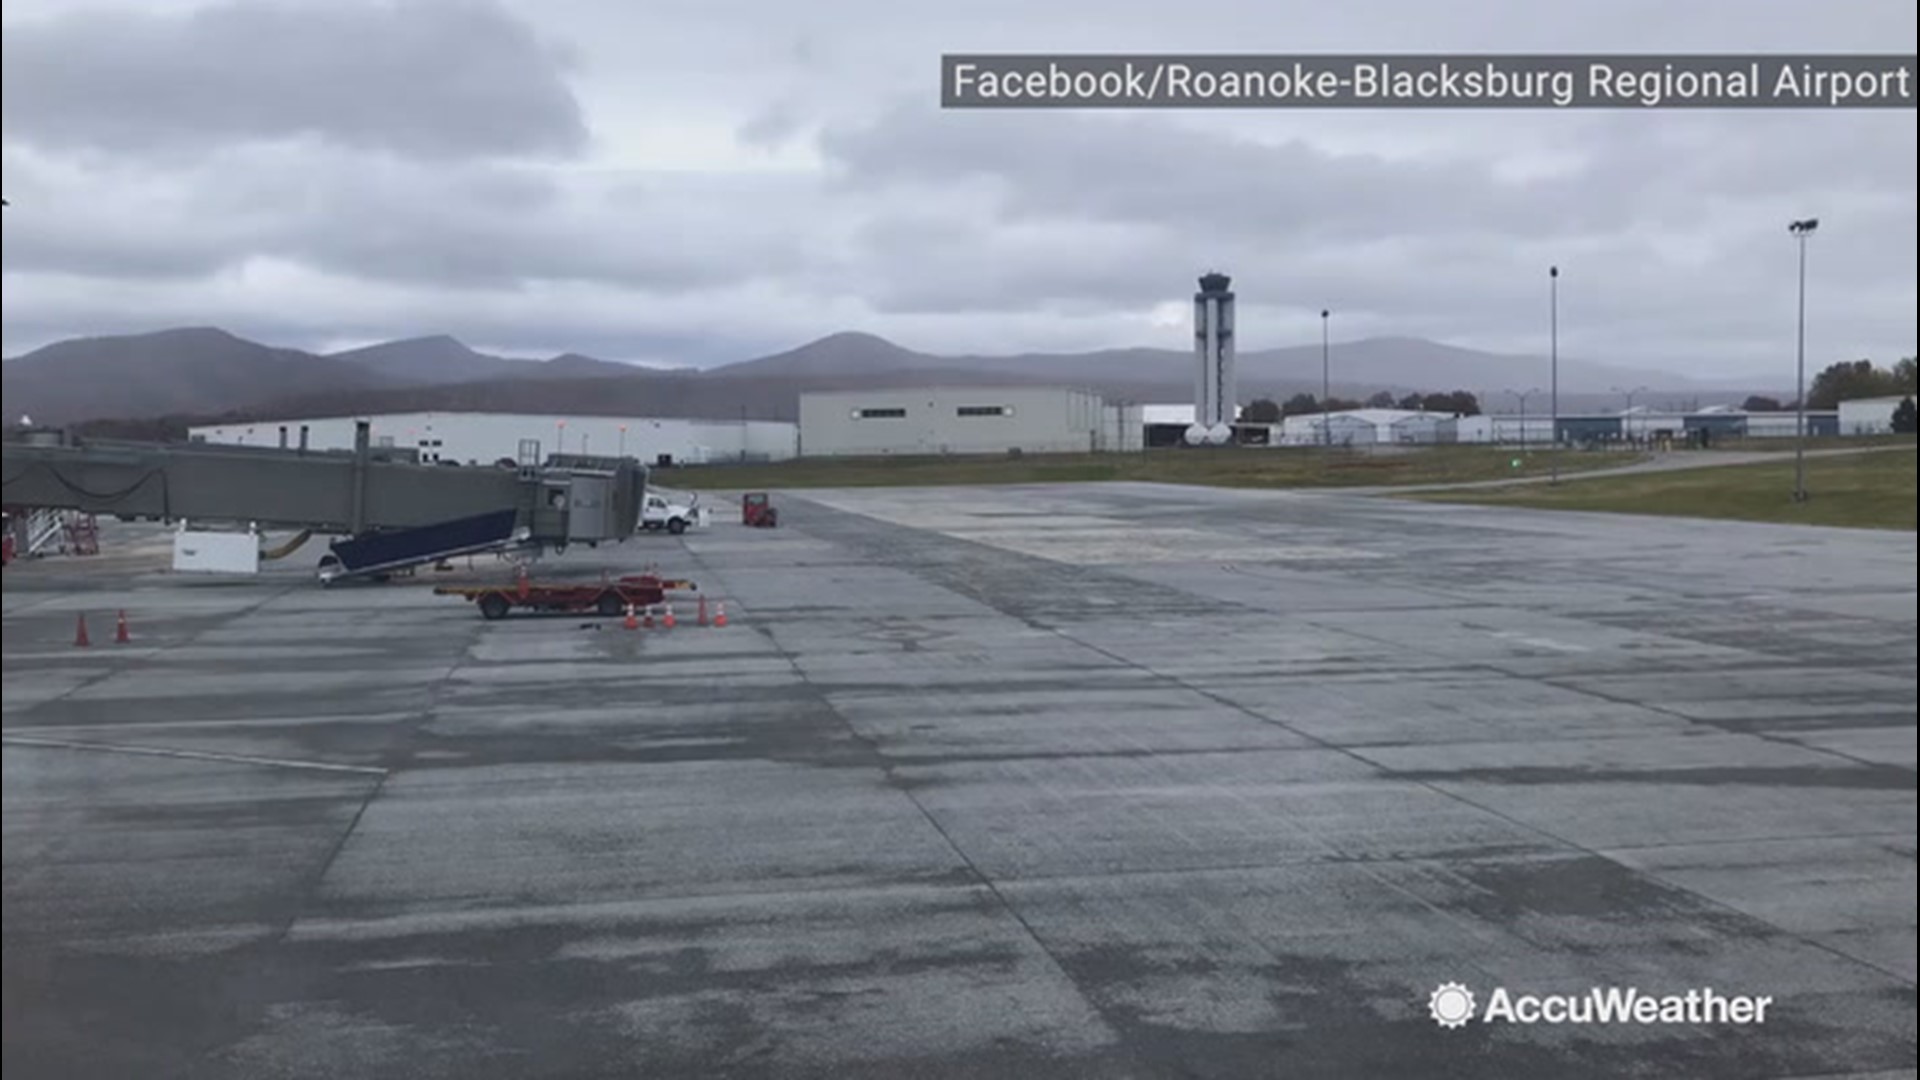 This time-lapse video shows the first snow dusting of the season in Roanoke, Virginia, at the Roanoke-Blacksburg Regional Airport, on Nov. 12.